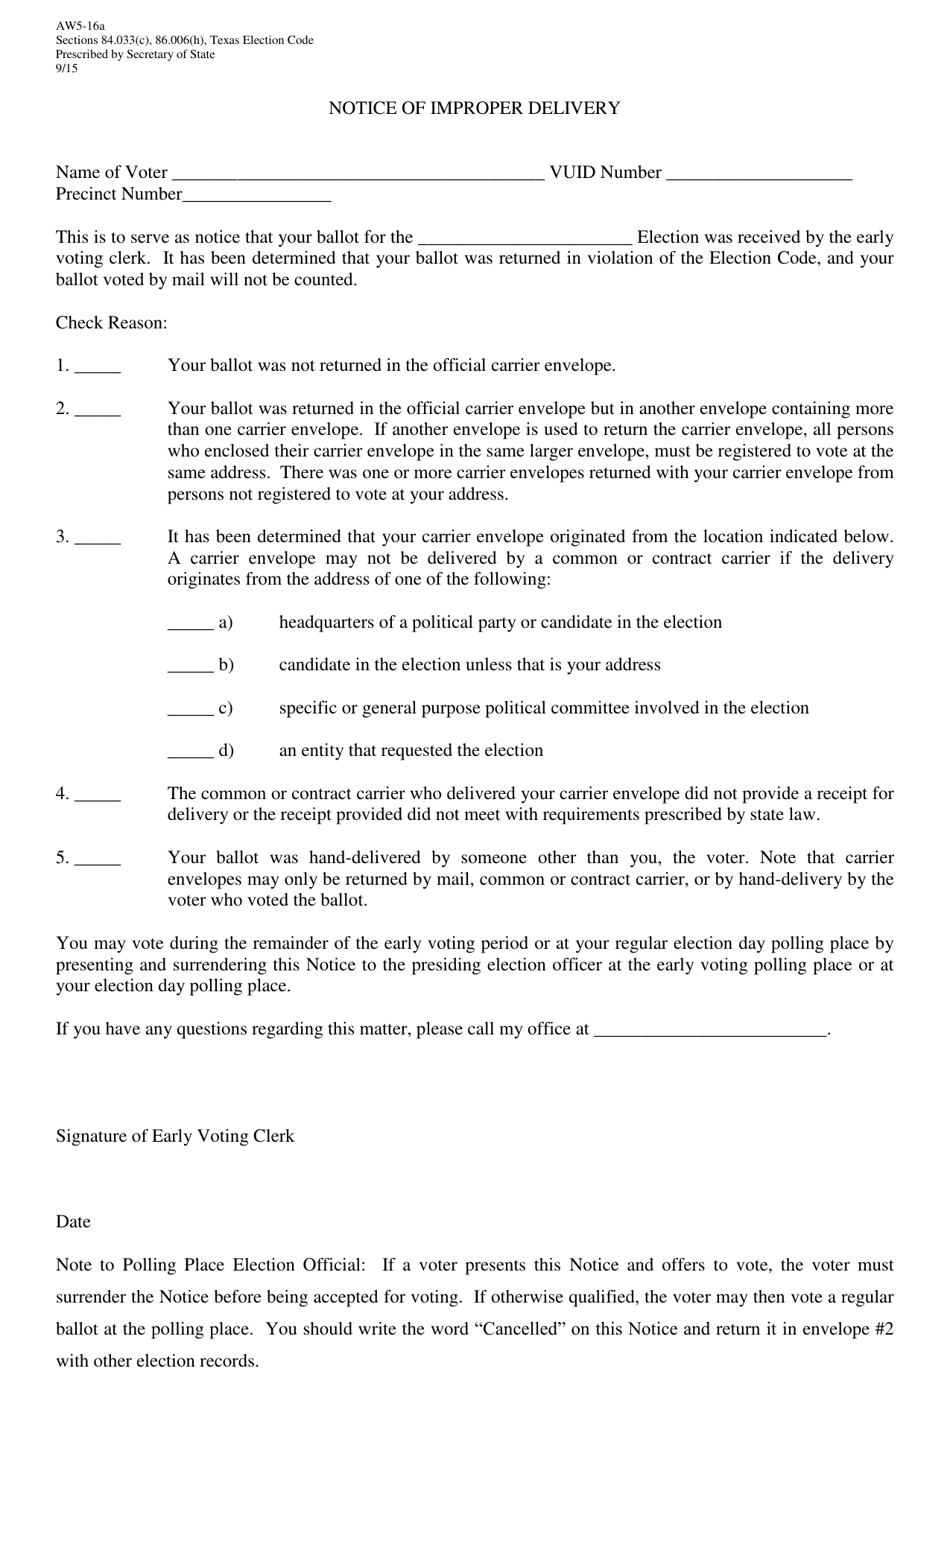 Form AW5-16A Notice of Improper Delivery - Texas (English / Spanish), Page 1